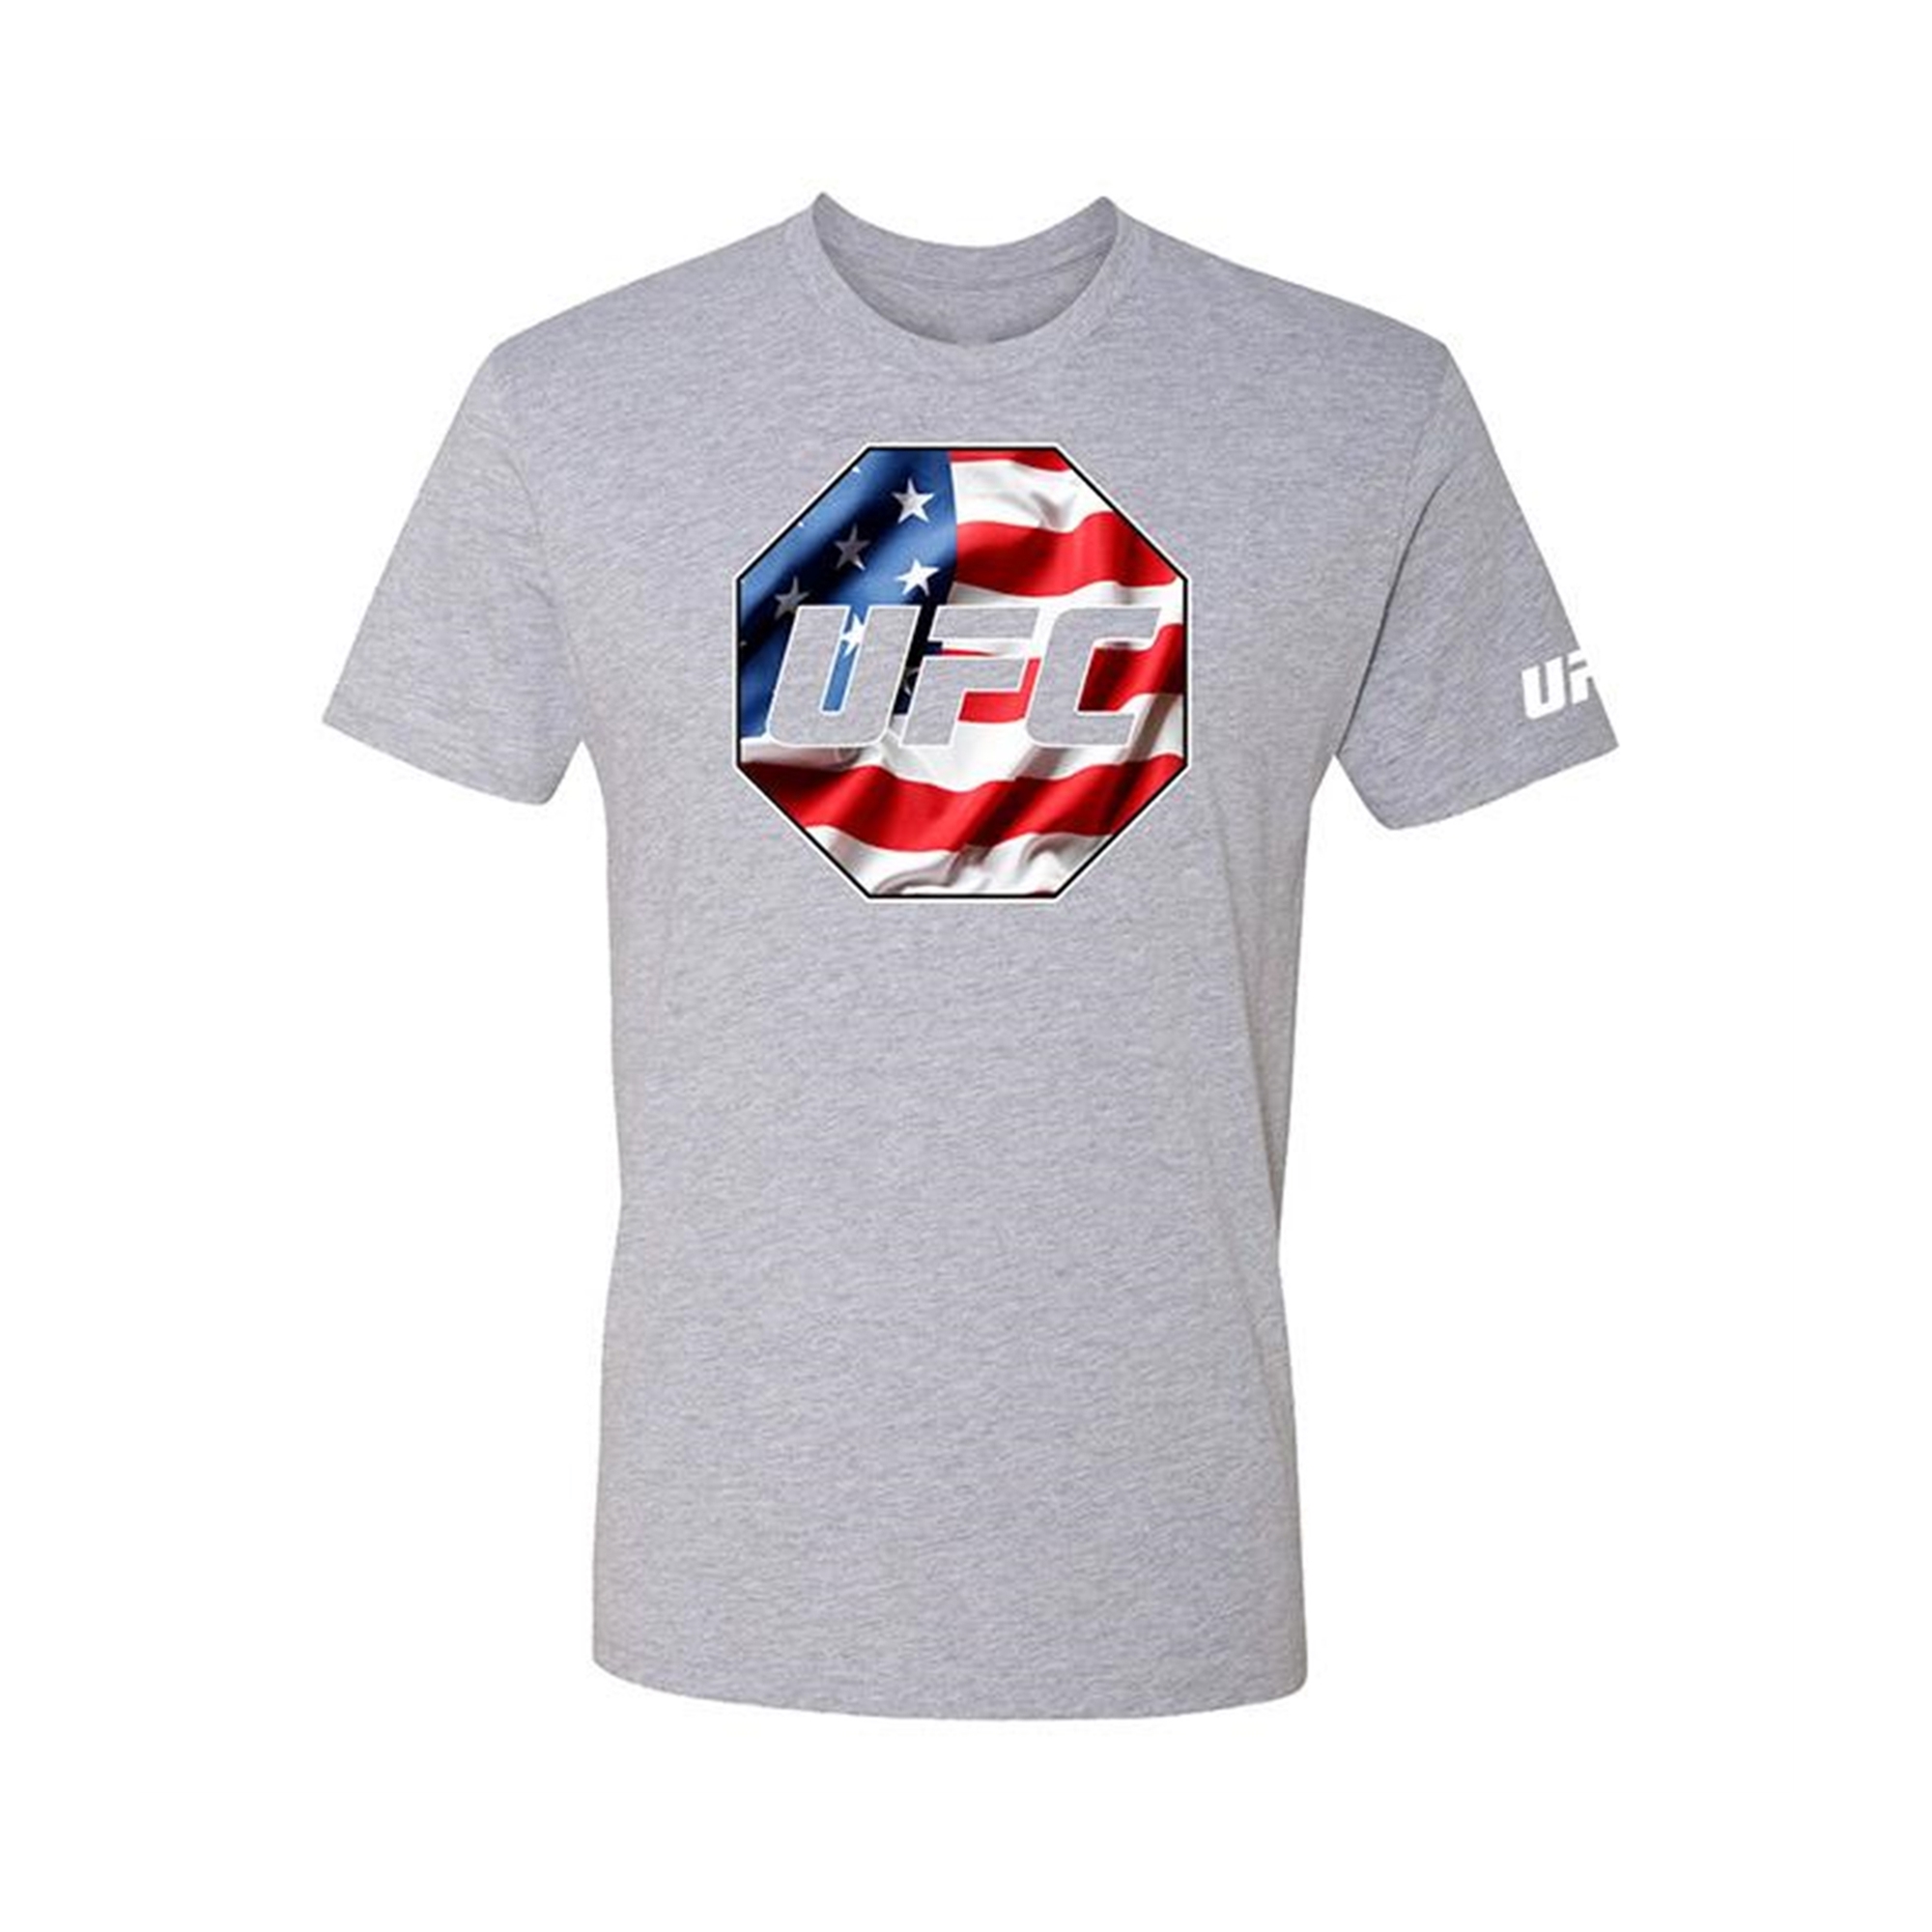 UFC Mens USA Country Flag Graphic T-Shirt, Grey, Small - image 1 of 1